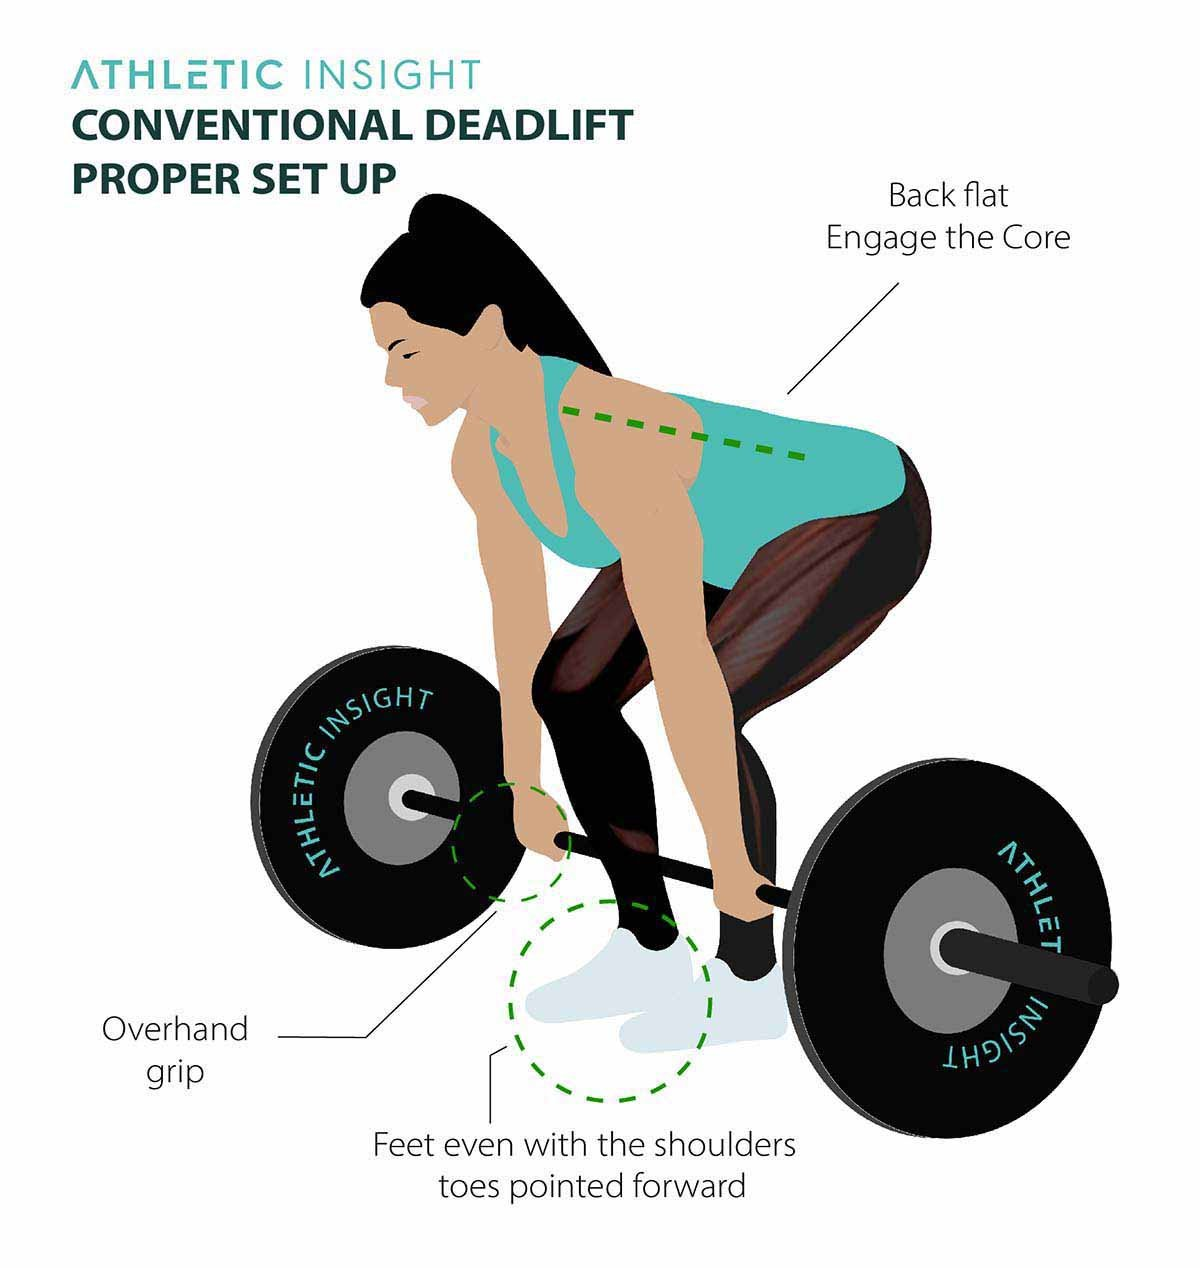 The photo shows one of the types of deadlifts: a properly set up conventional deadlift